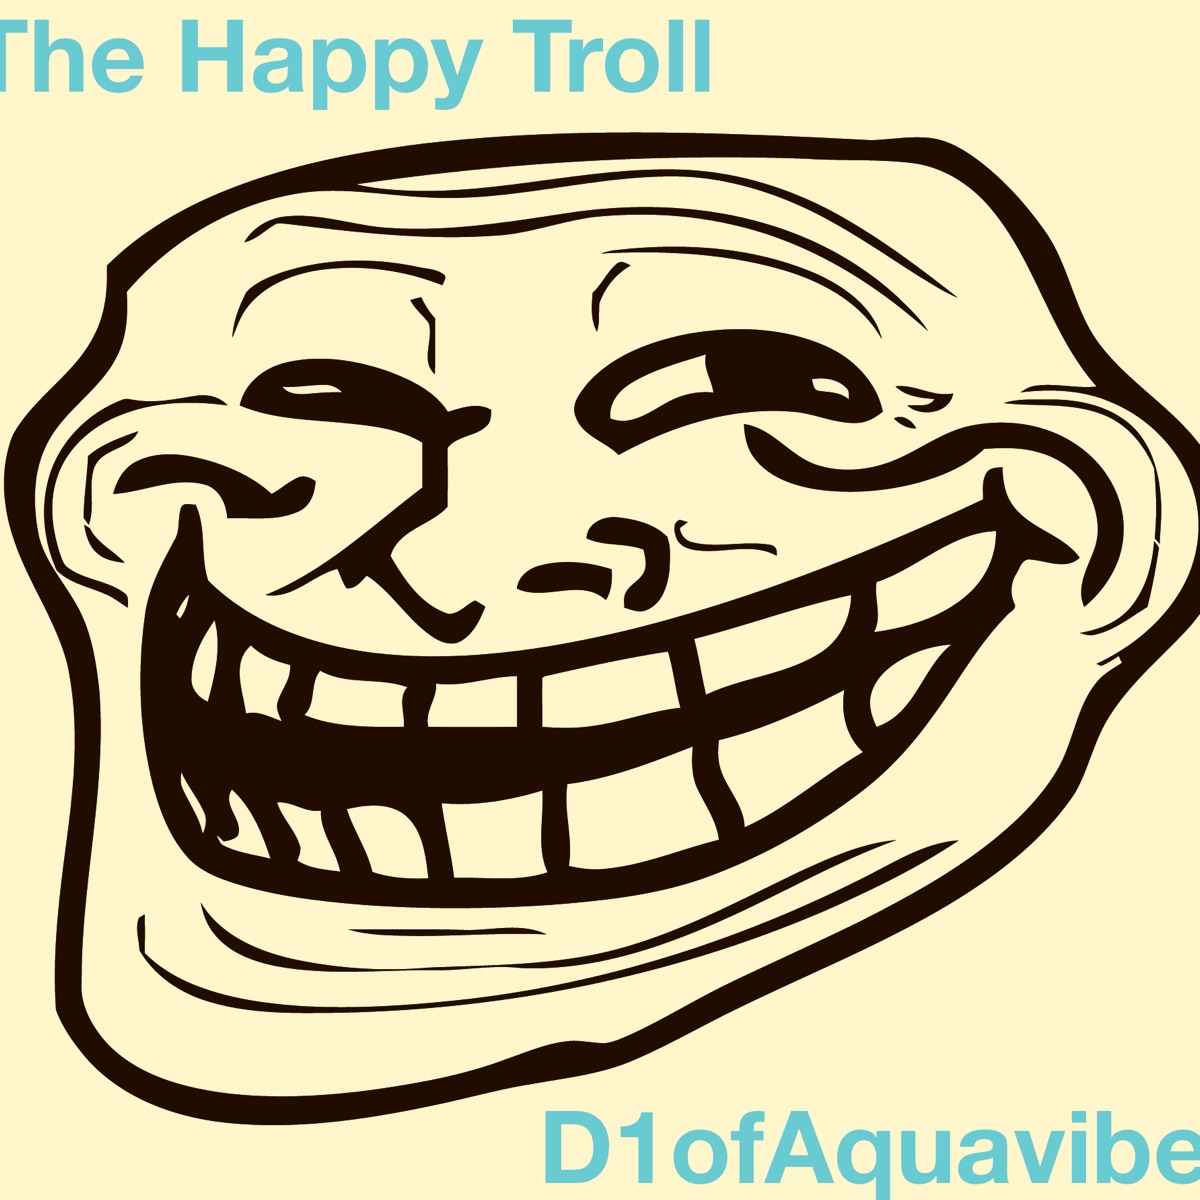 The Happy Troll (Griefing Theme Song) - Single - Album by D1ofaquavibe -  Apple Music